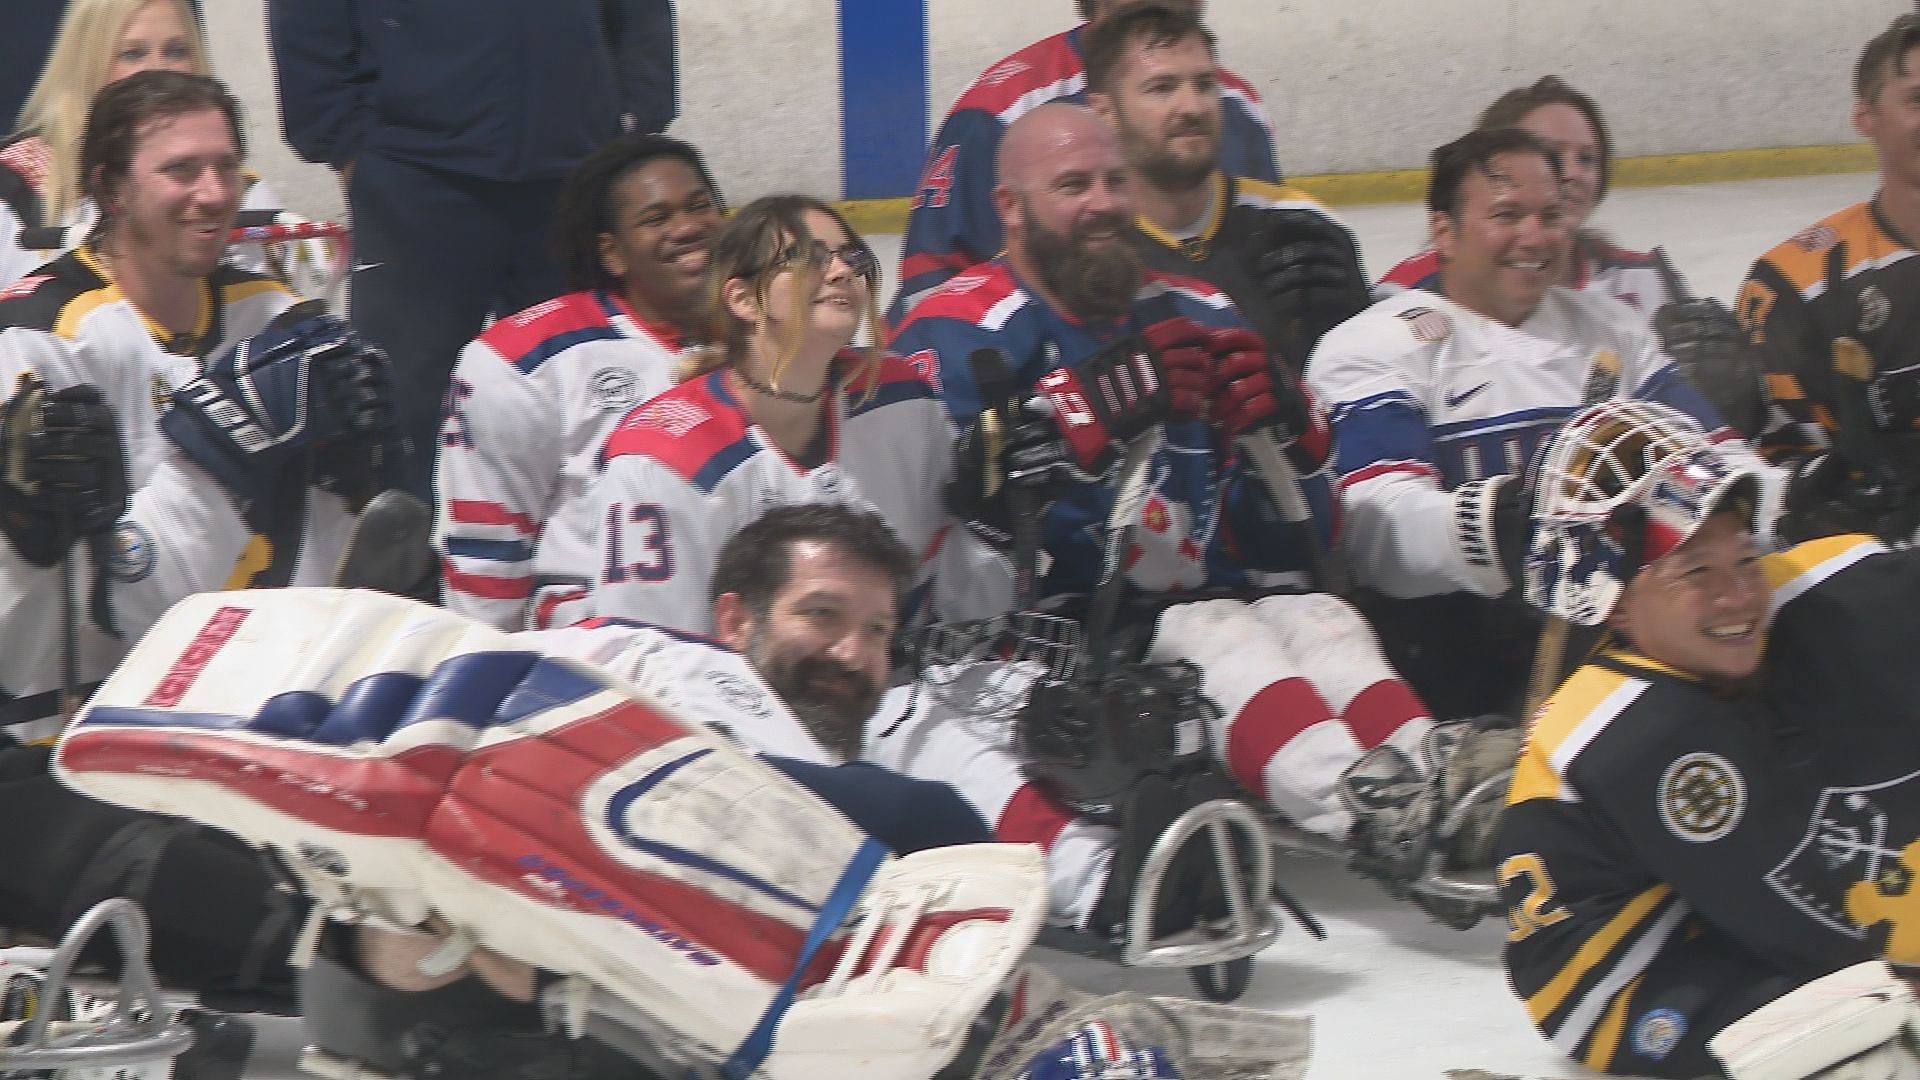 The US Paralympic Sled Hockey Team joined forces with the Warrior for Life Fund and the Boston Bruins Foundation in an epic hockey game Saturday afternoon.